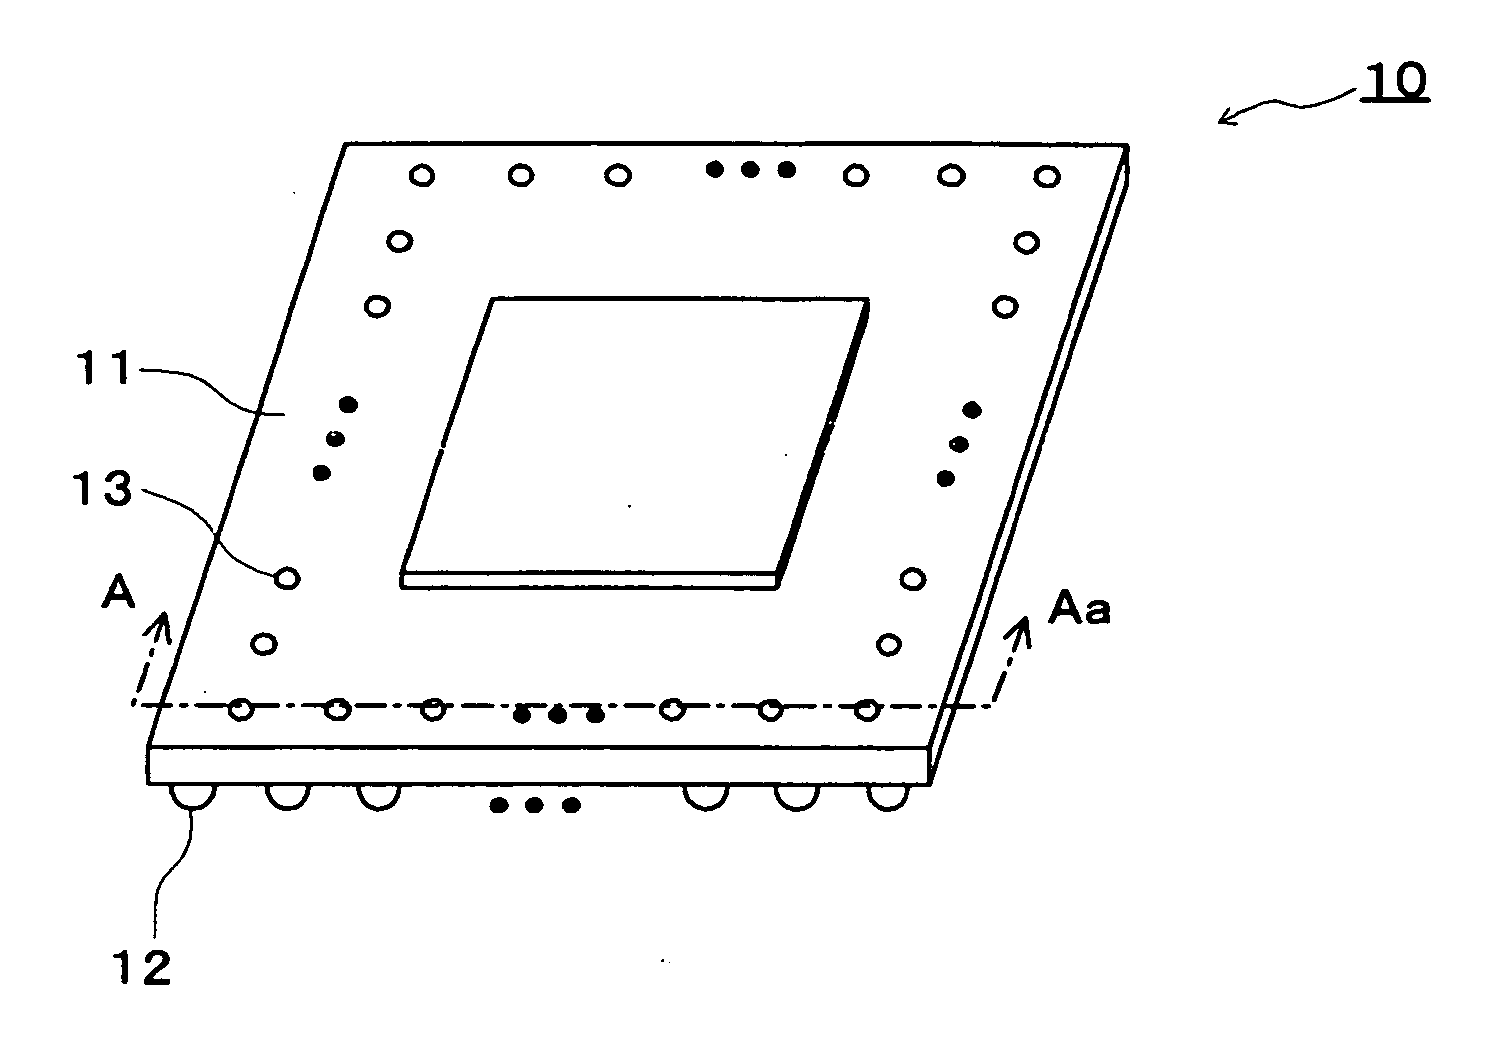 IC package, inspection method of IC package mounting body, repairing method of IC package mounting body, and inspection pin for IC package mounting body